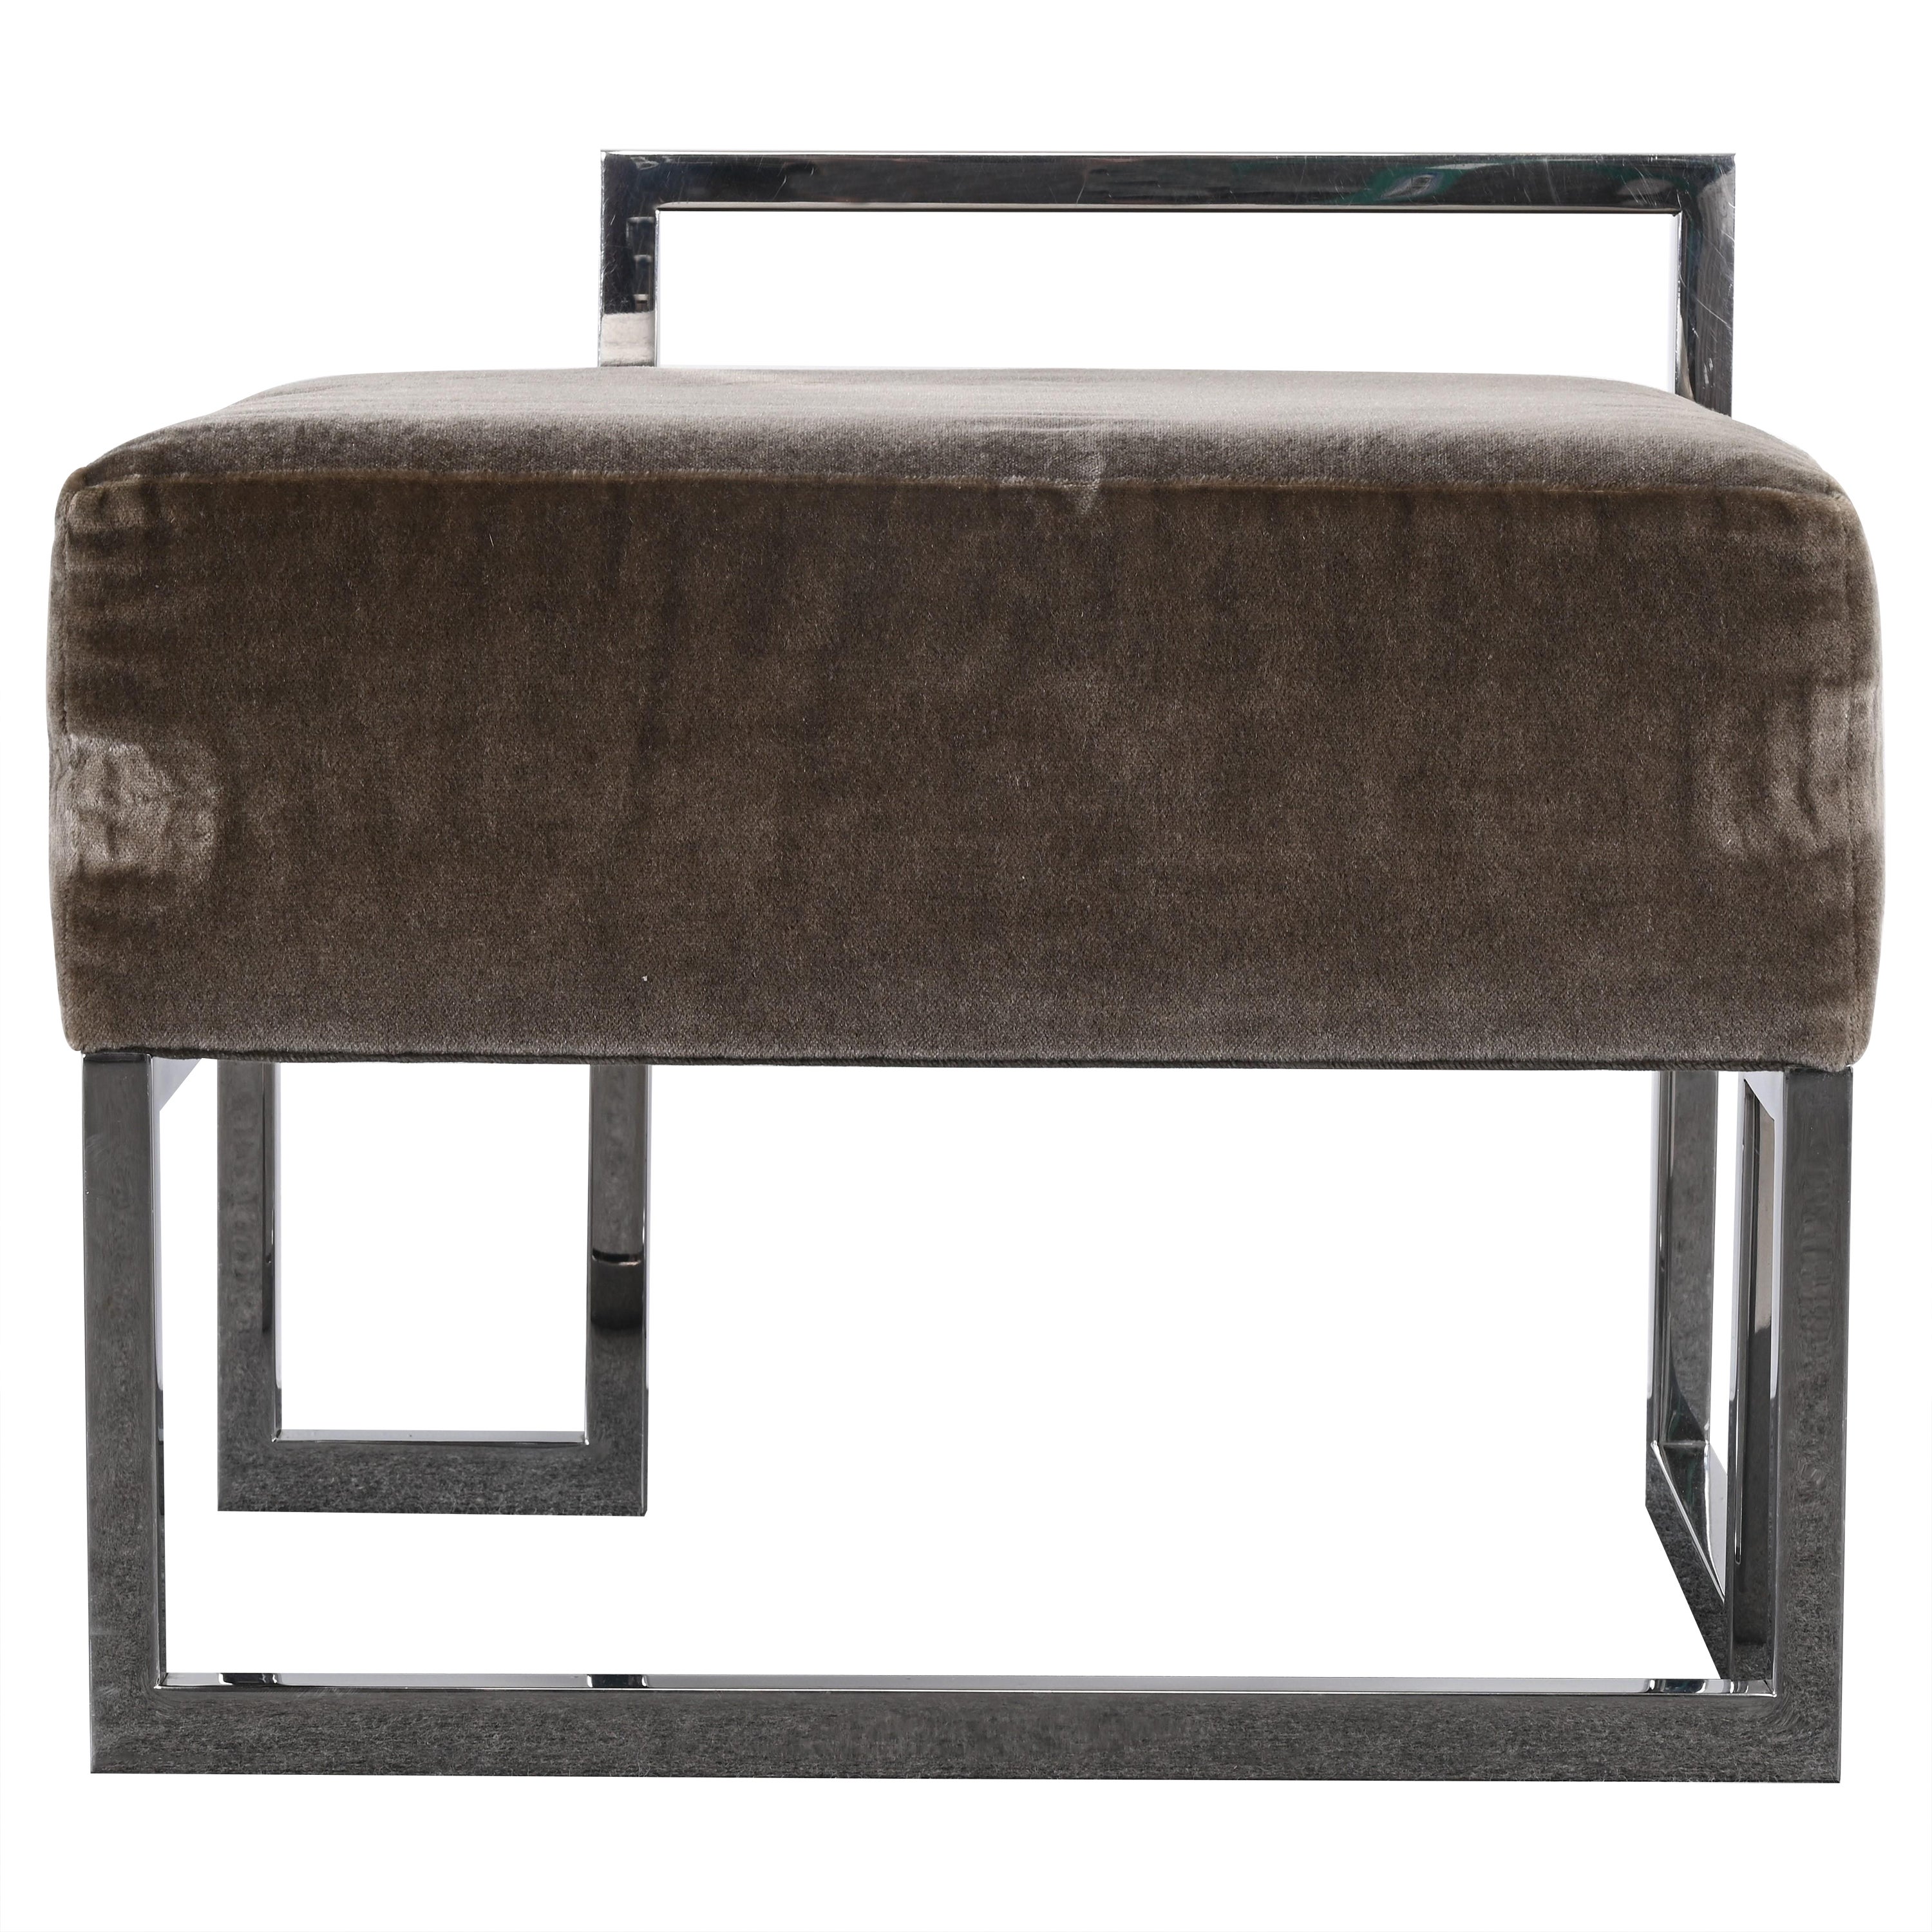 Stainless Steel Bench by Vladimir Kagan for Gucci, 1990s For Sale